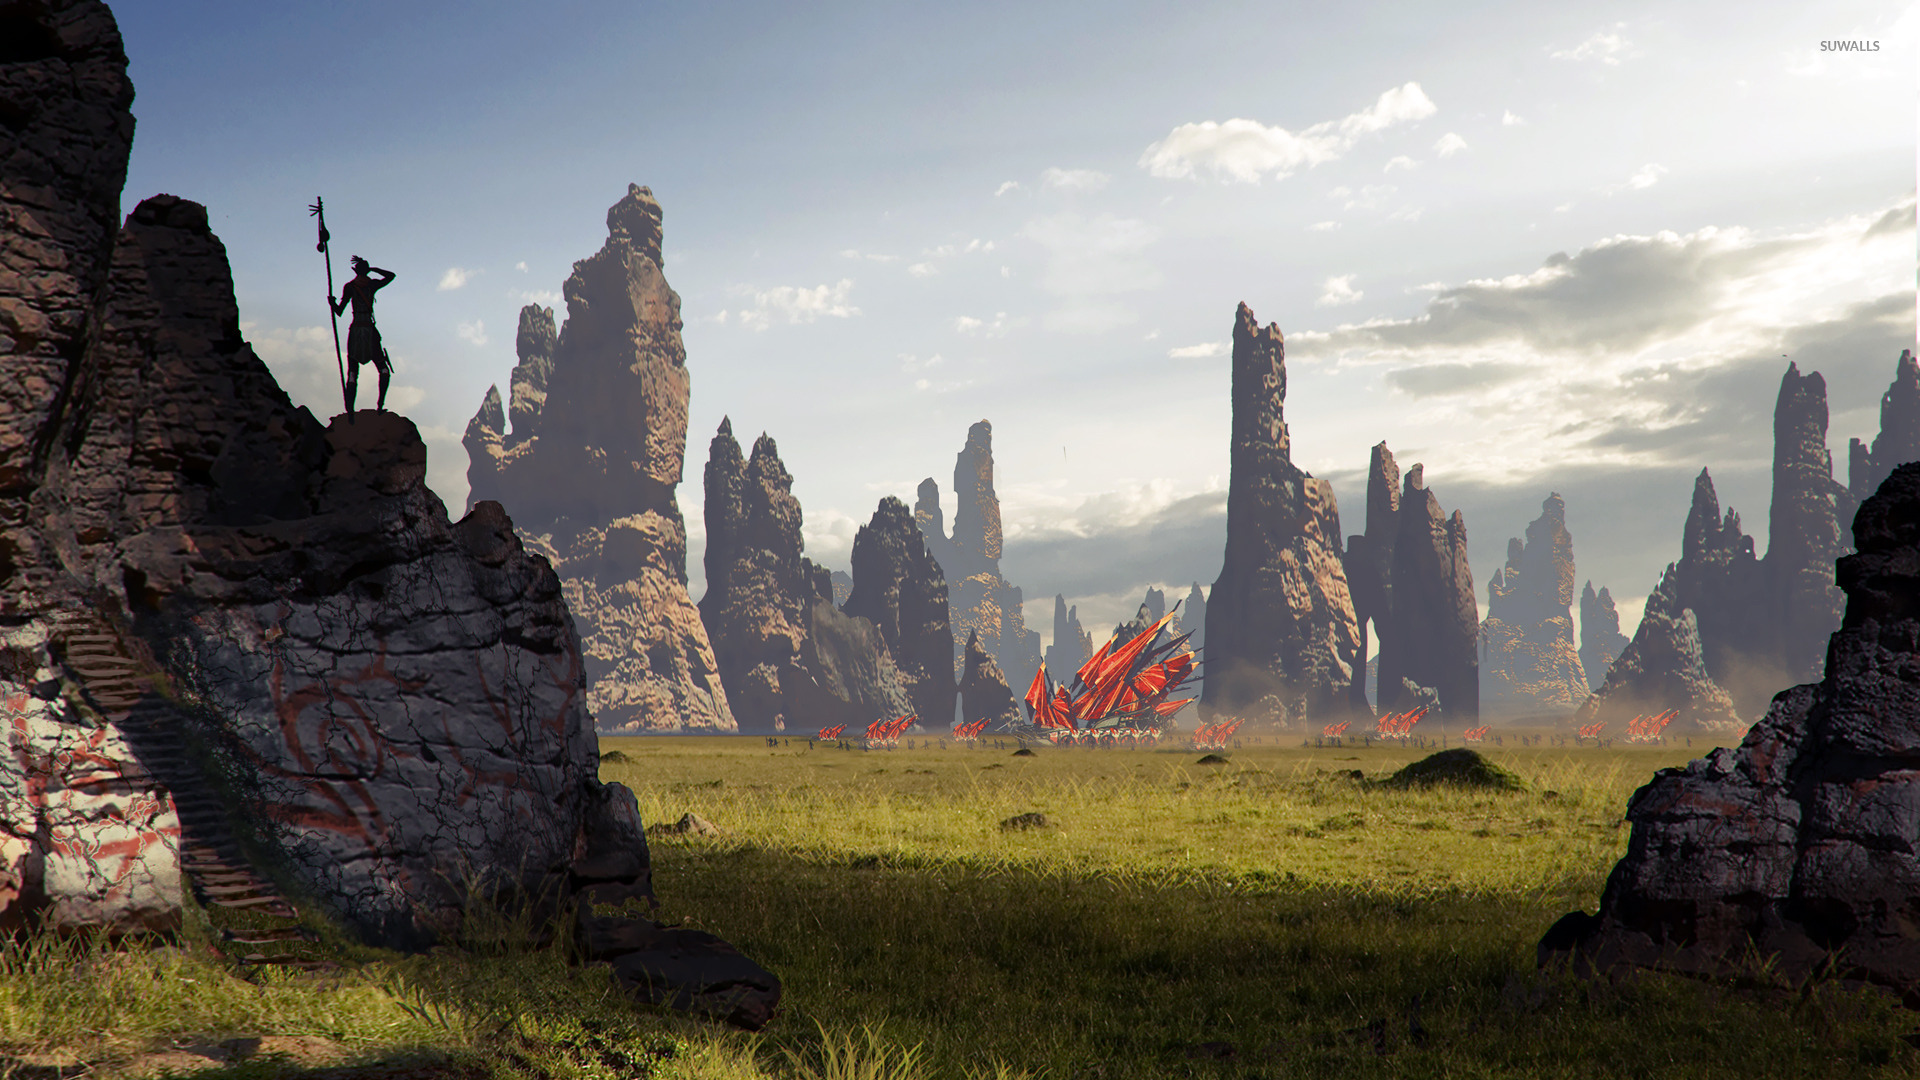 Dragon Age Inquisition Wallpapers 1920x1080 89 images